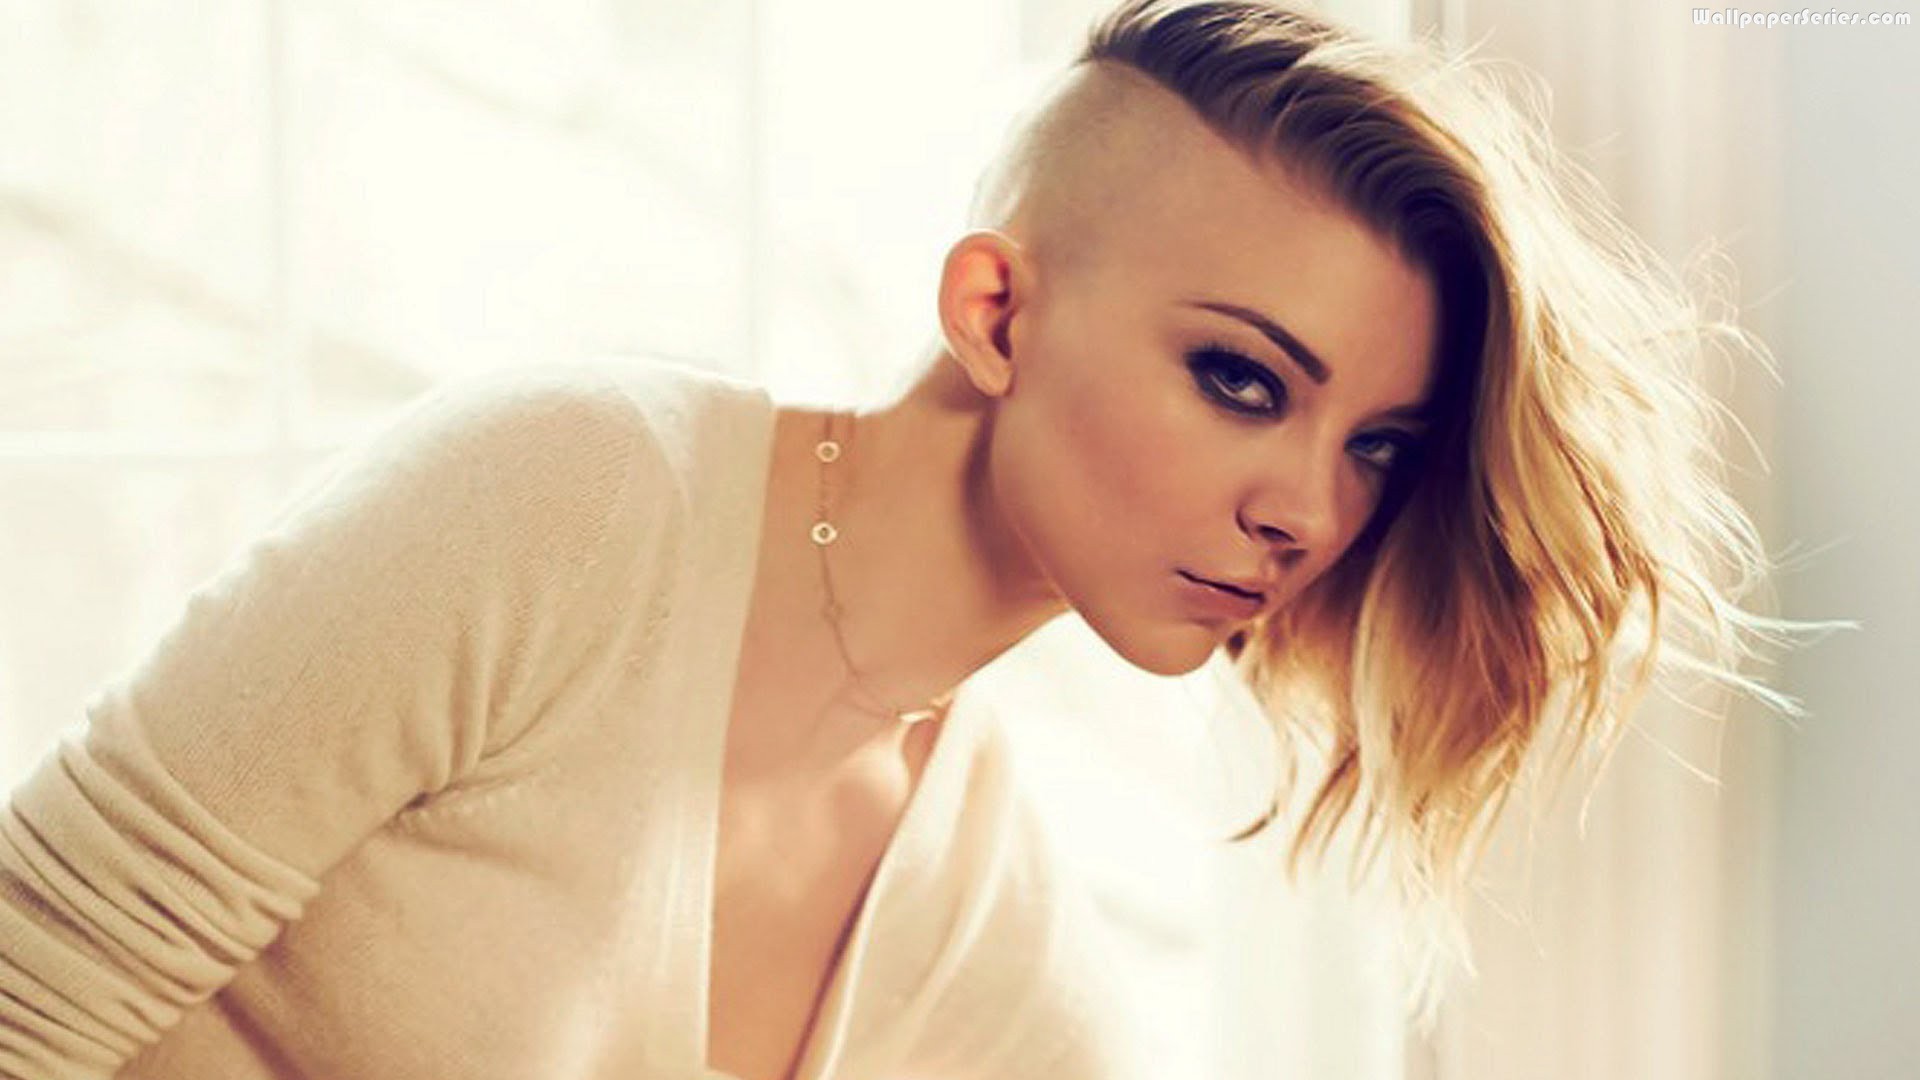 Natalie Dormer Wallpapers High Resolution and Quality Download